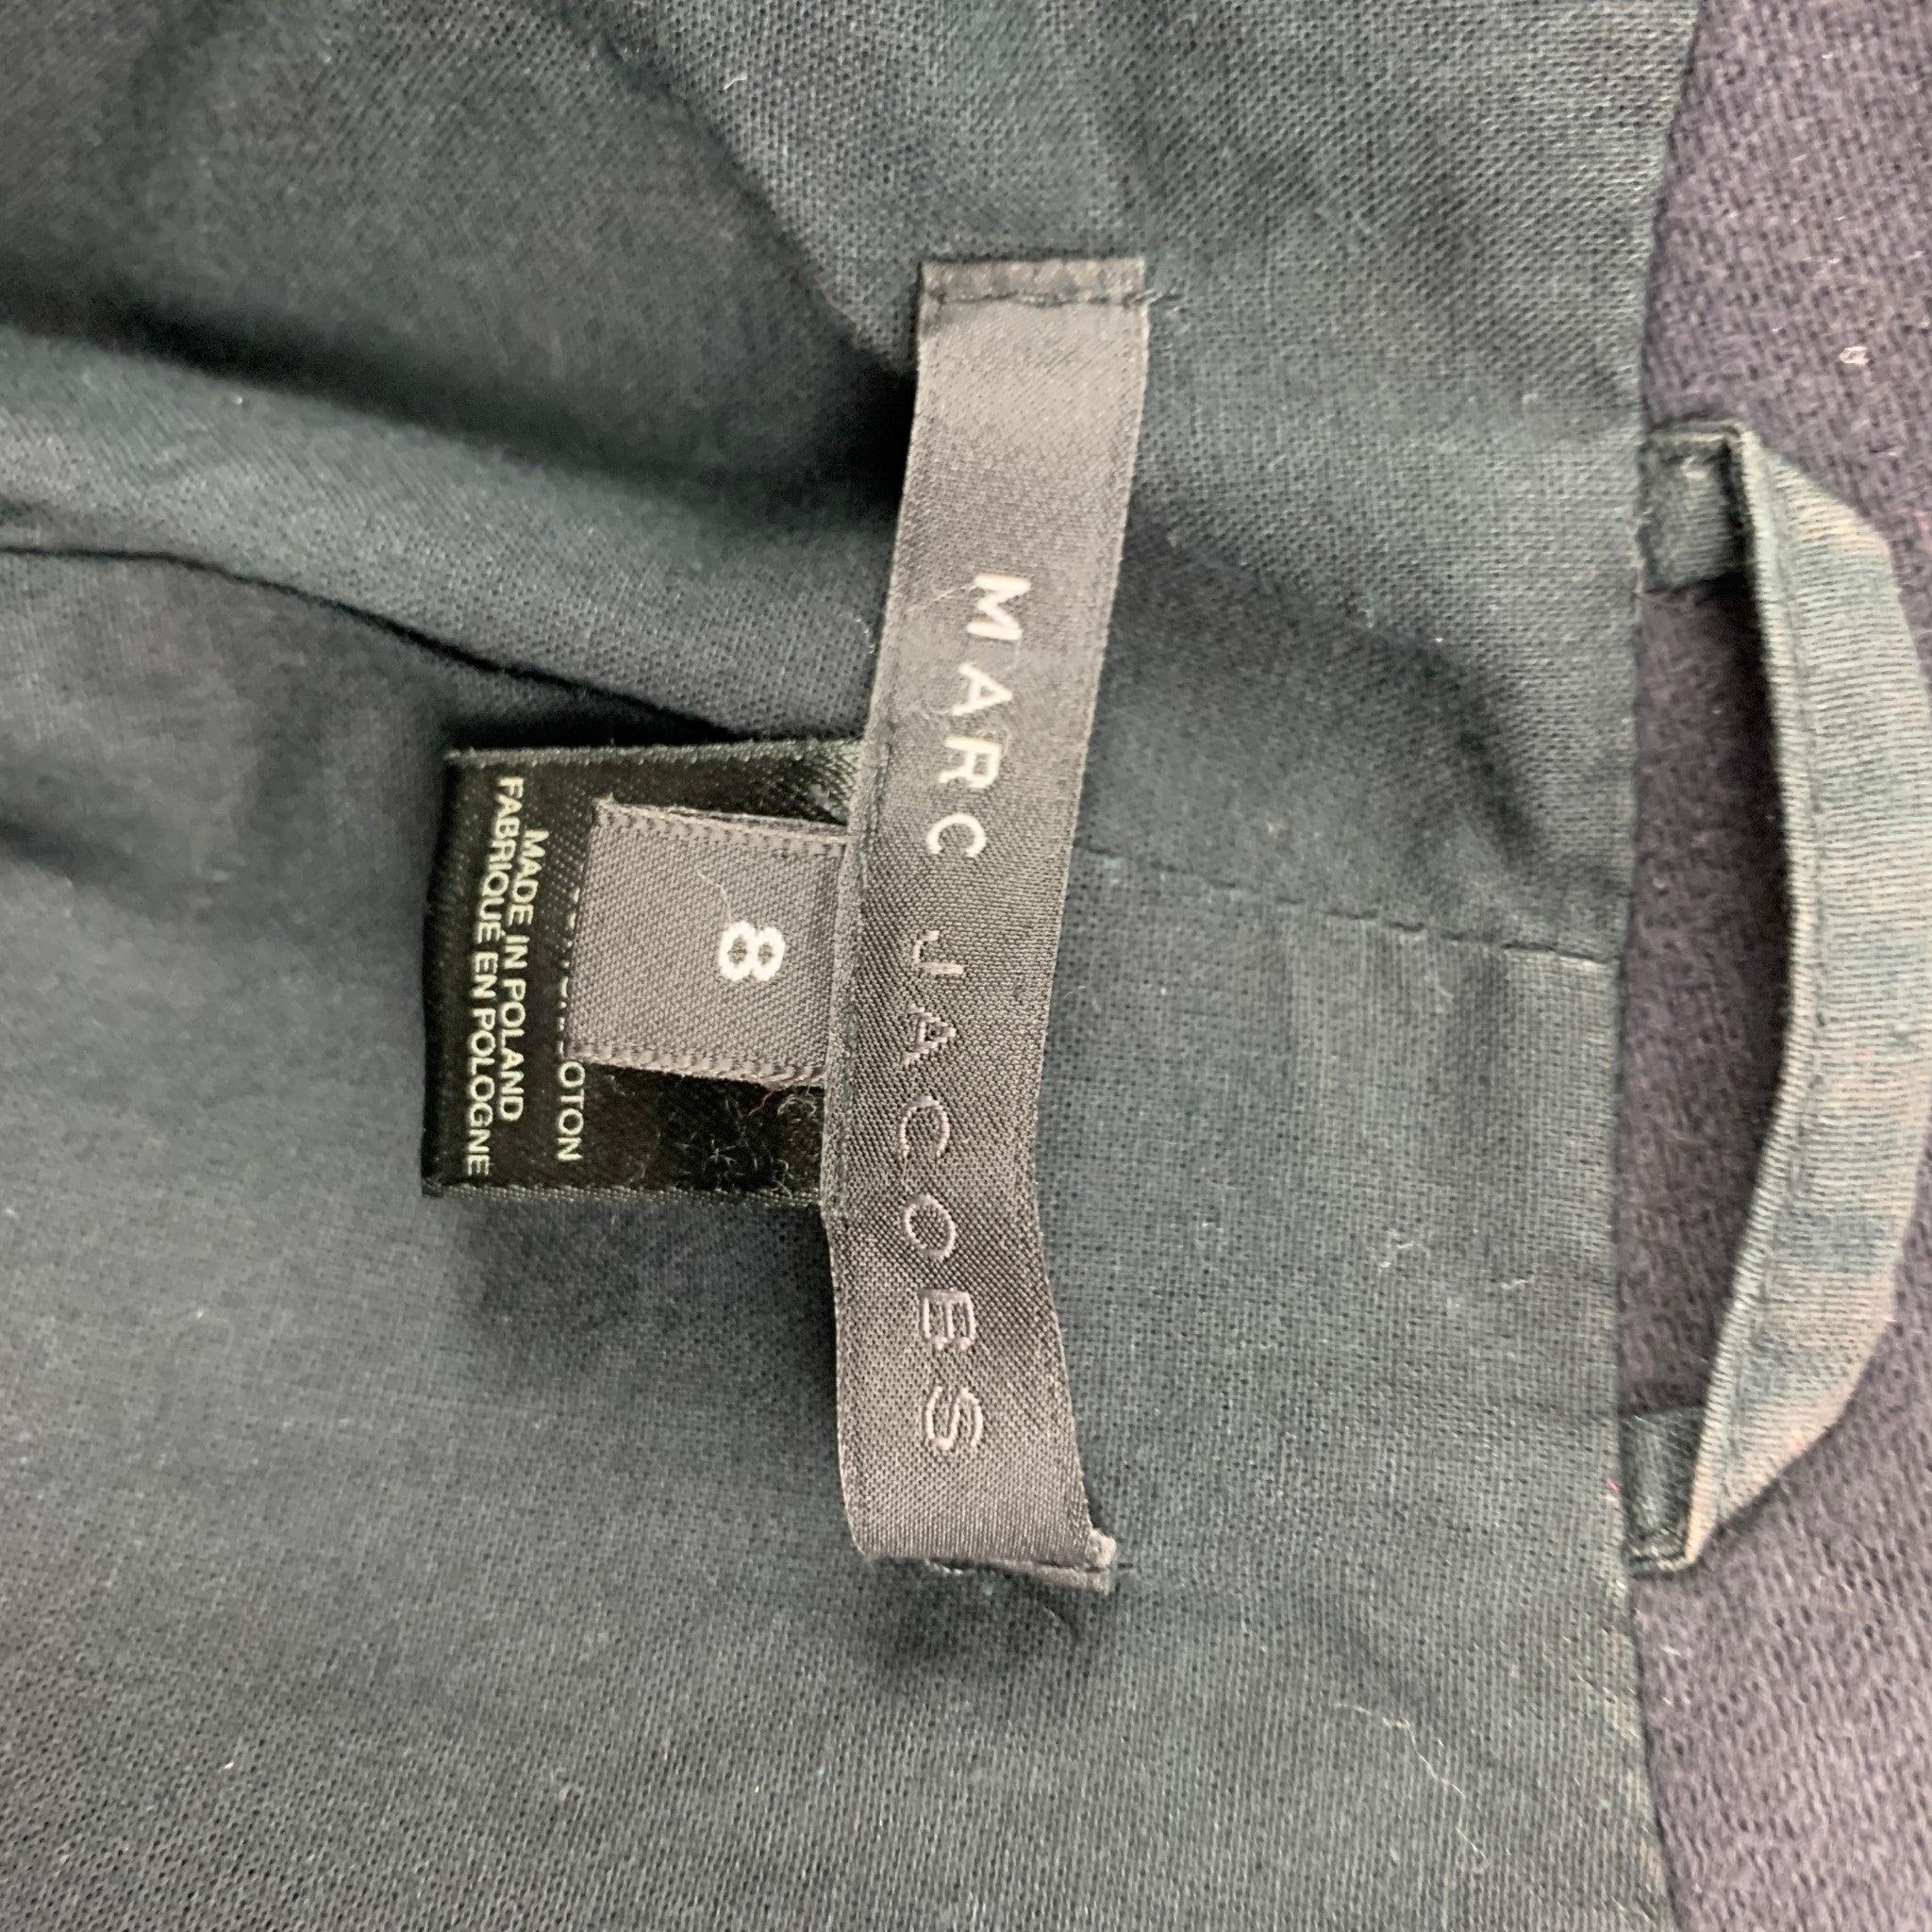 MARC by MARC JACOBS Size 8 Charcoal Cotton Jacket Blazer For Sale 2